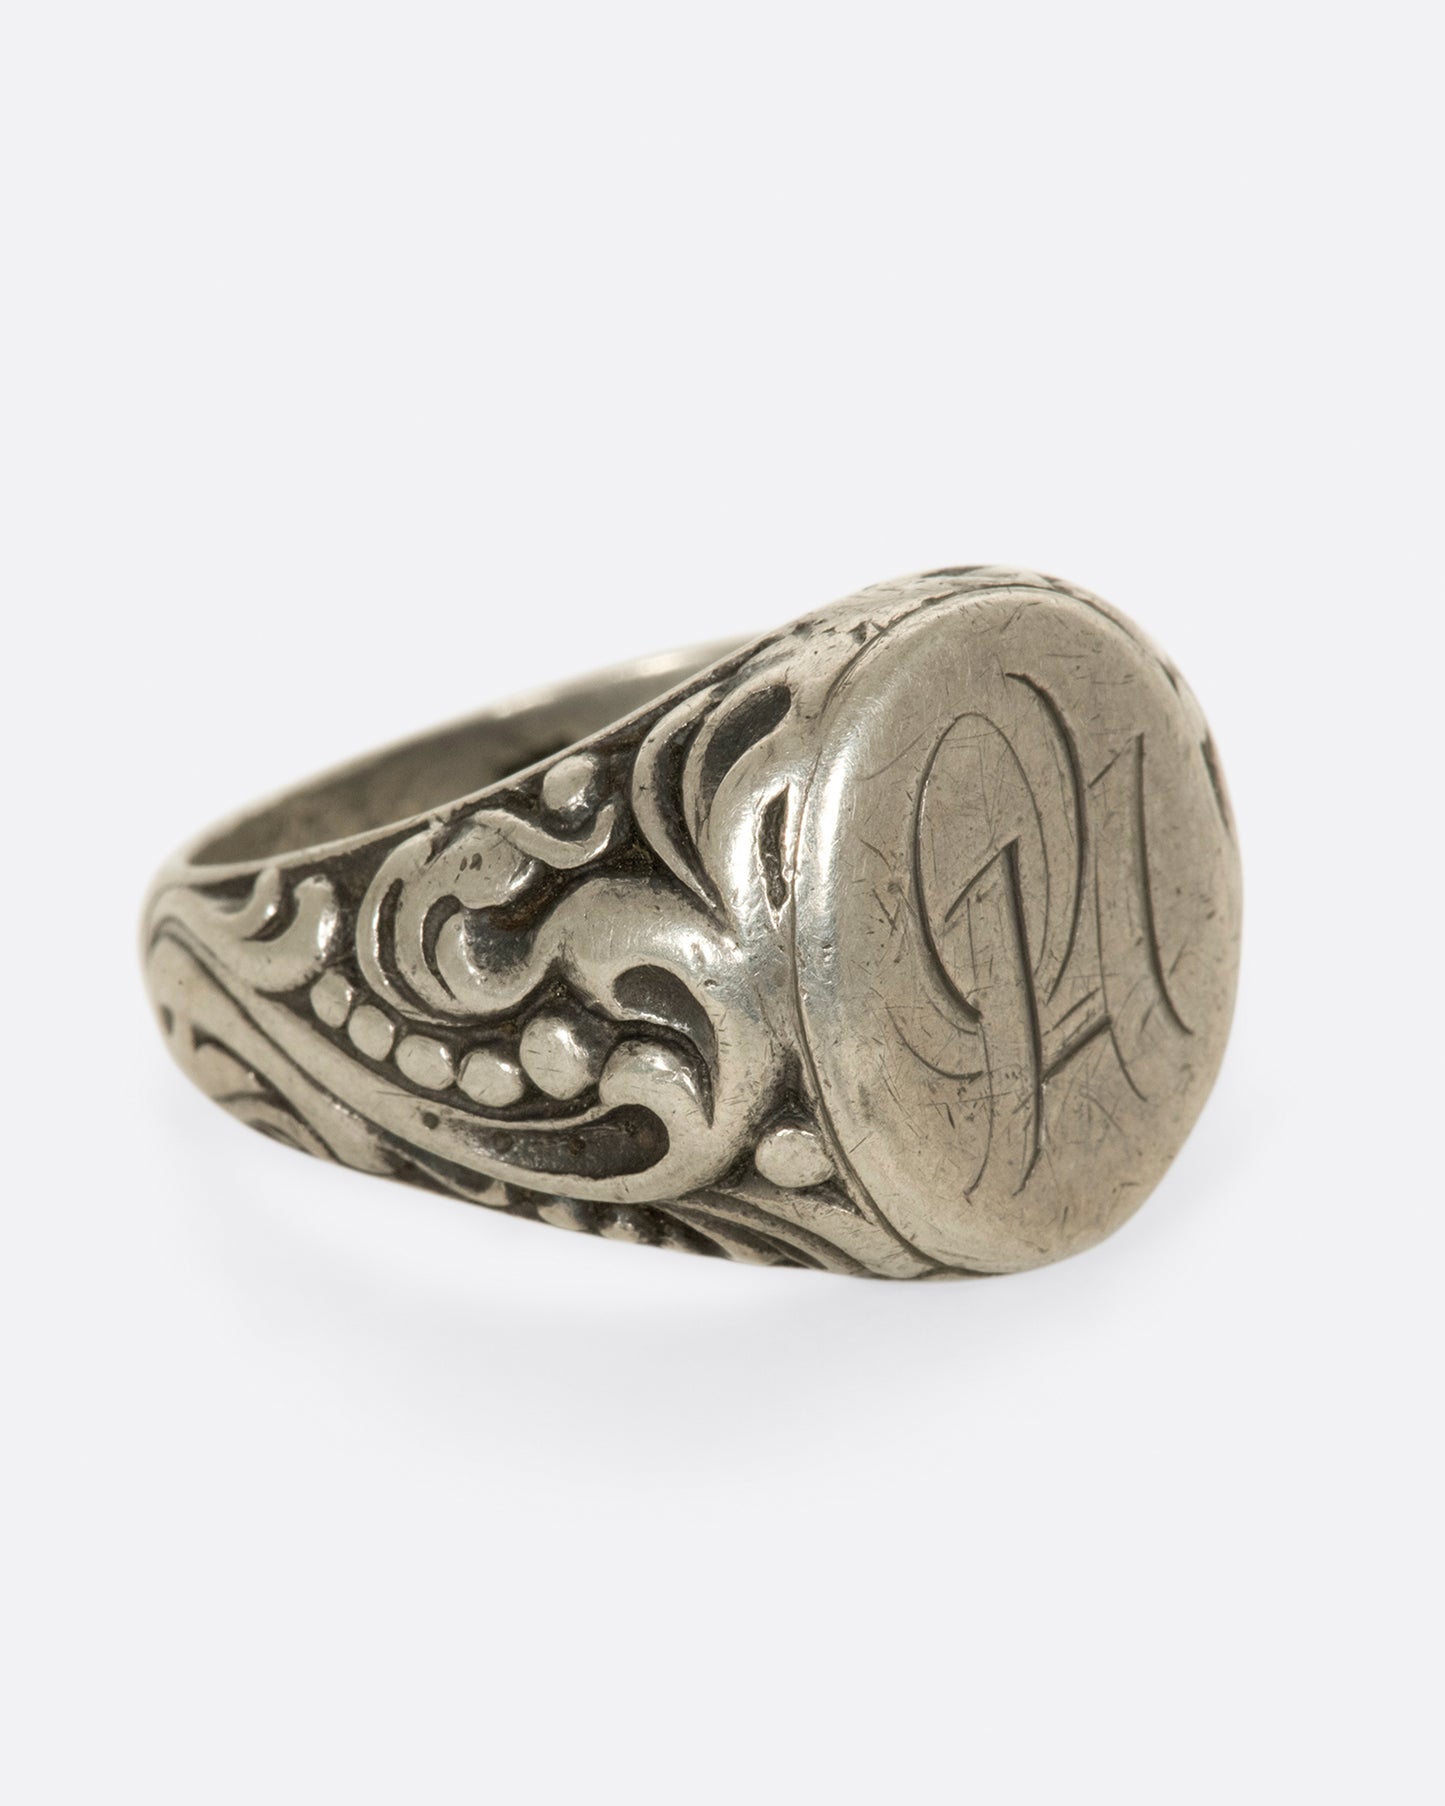 Perfect for the person whose initials are OH, or simply someone who aligns with the word.